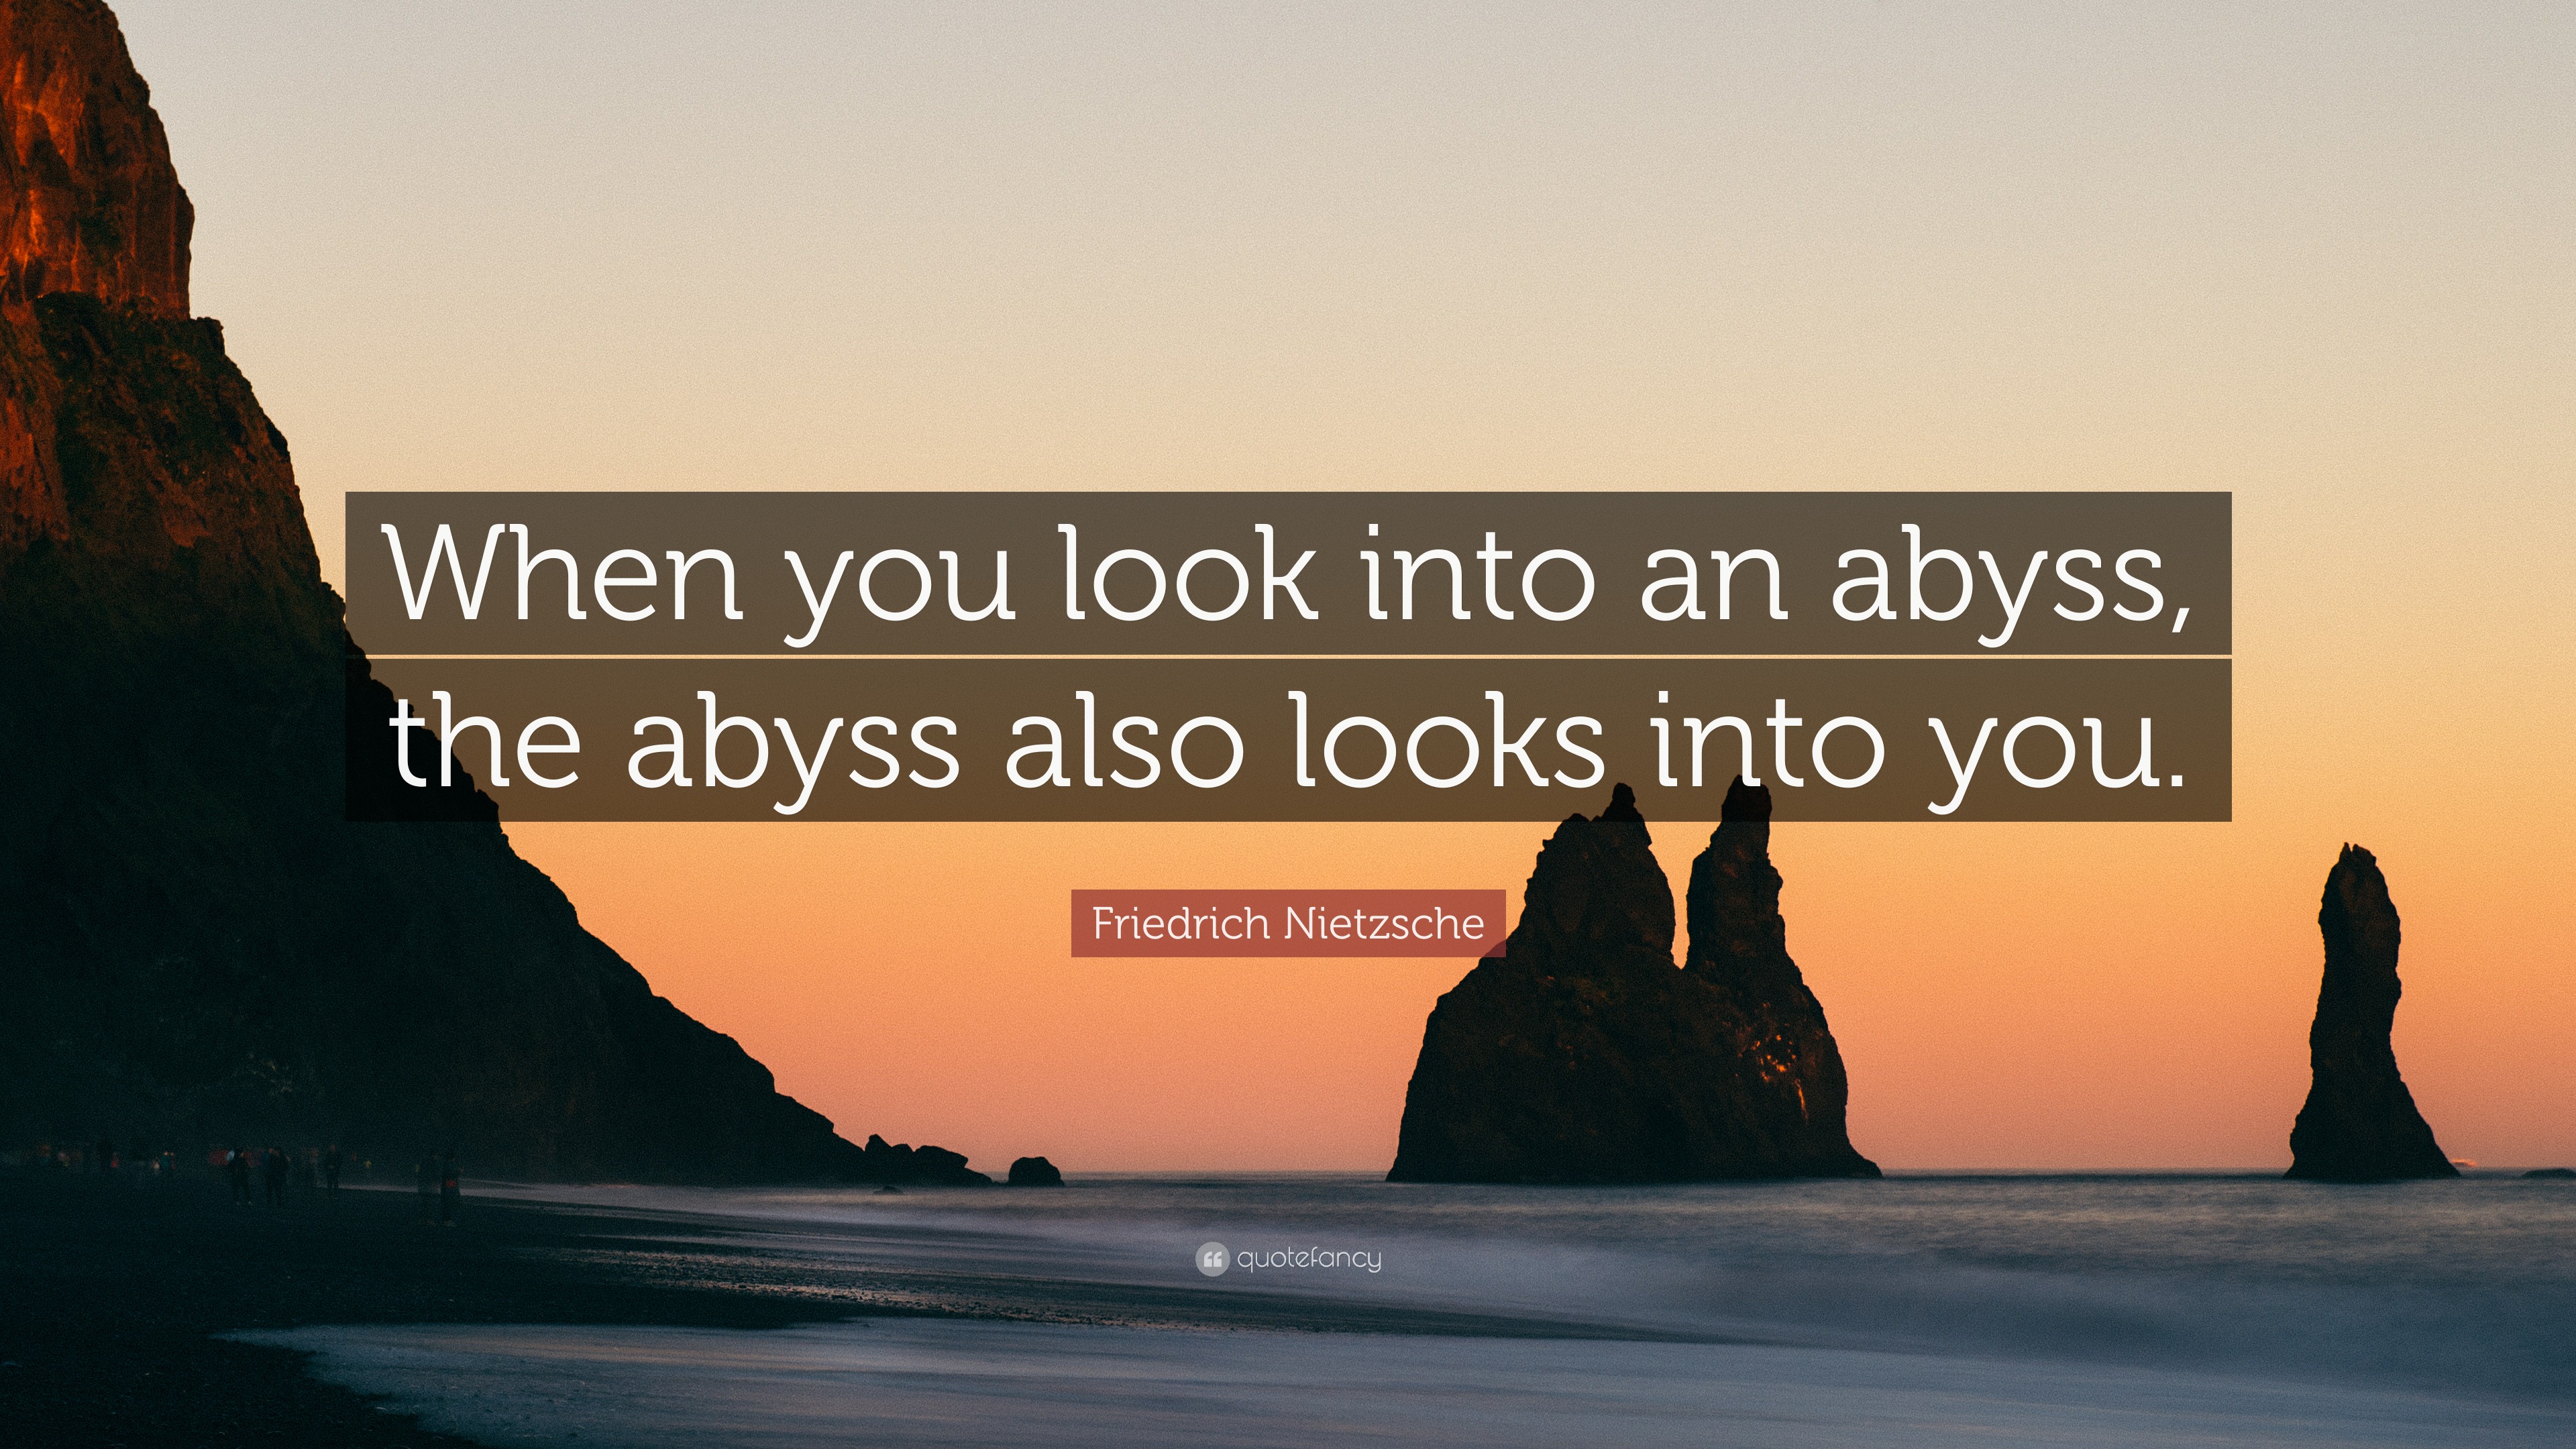 if you stare into the abyss quote